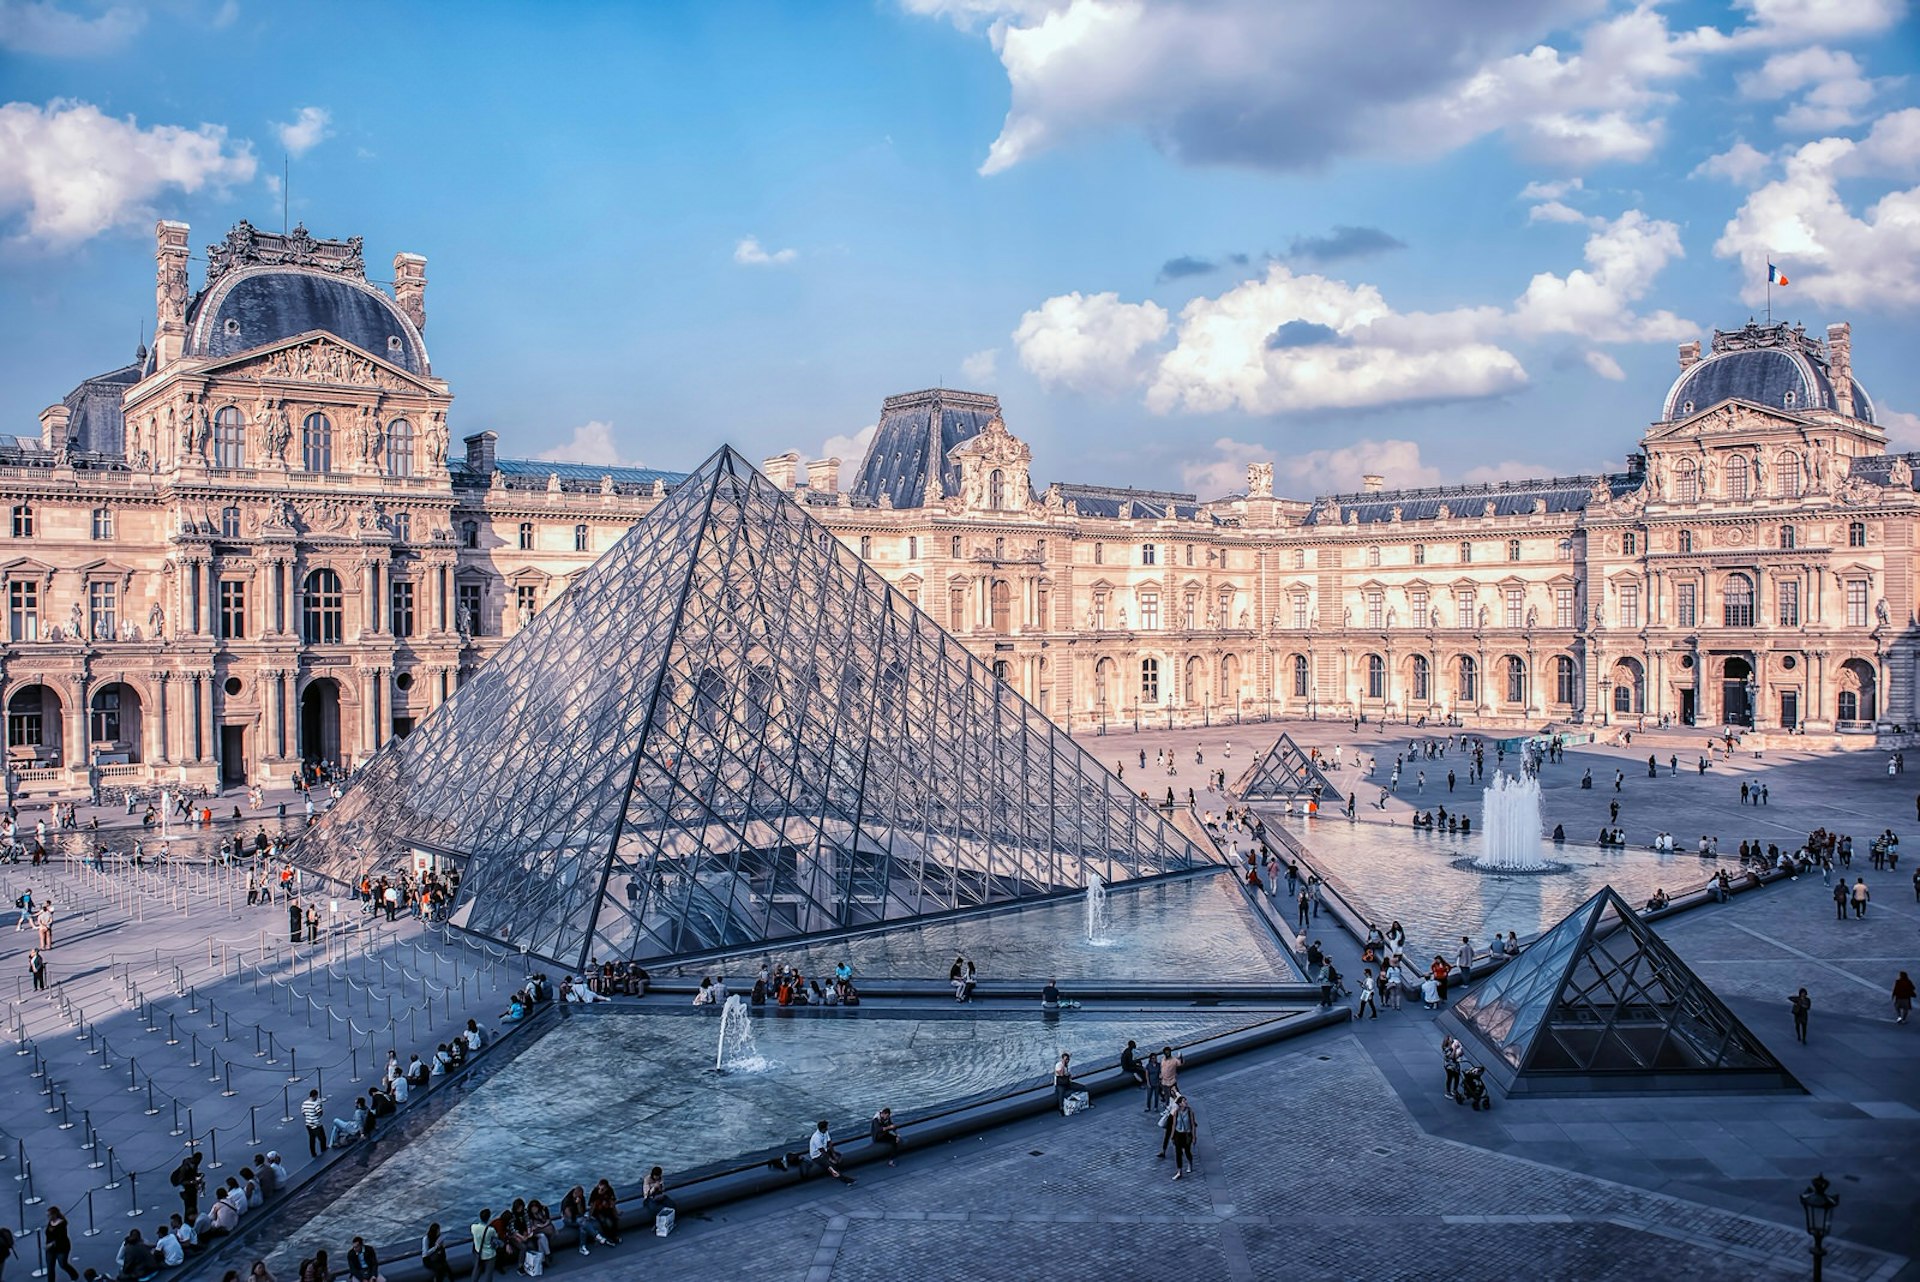 The large glass pyramid that serves as the entrance to the Louvre Museum surrounded by fountains and people; the backdrop is the gloriously detailed facade of the historical palace